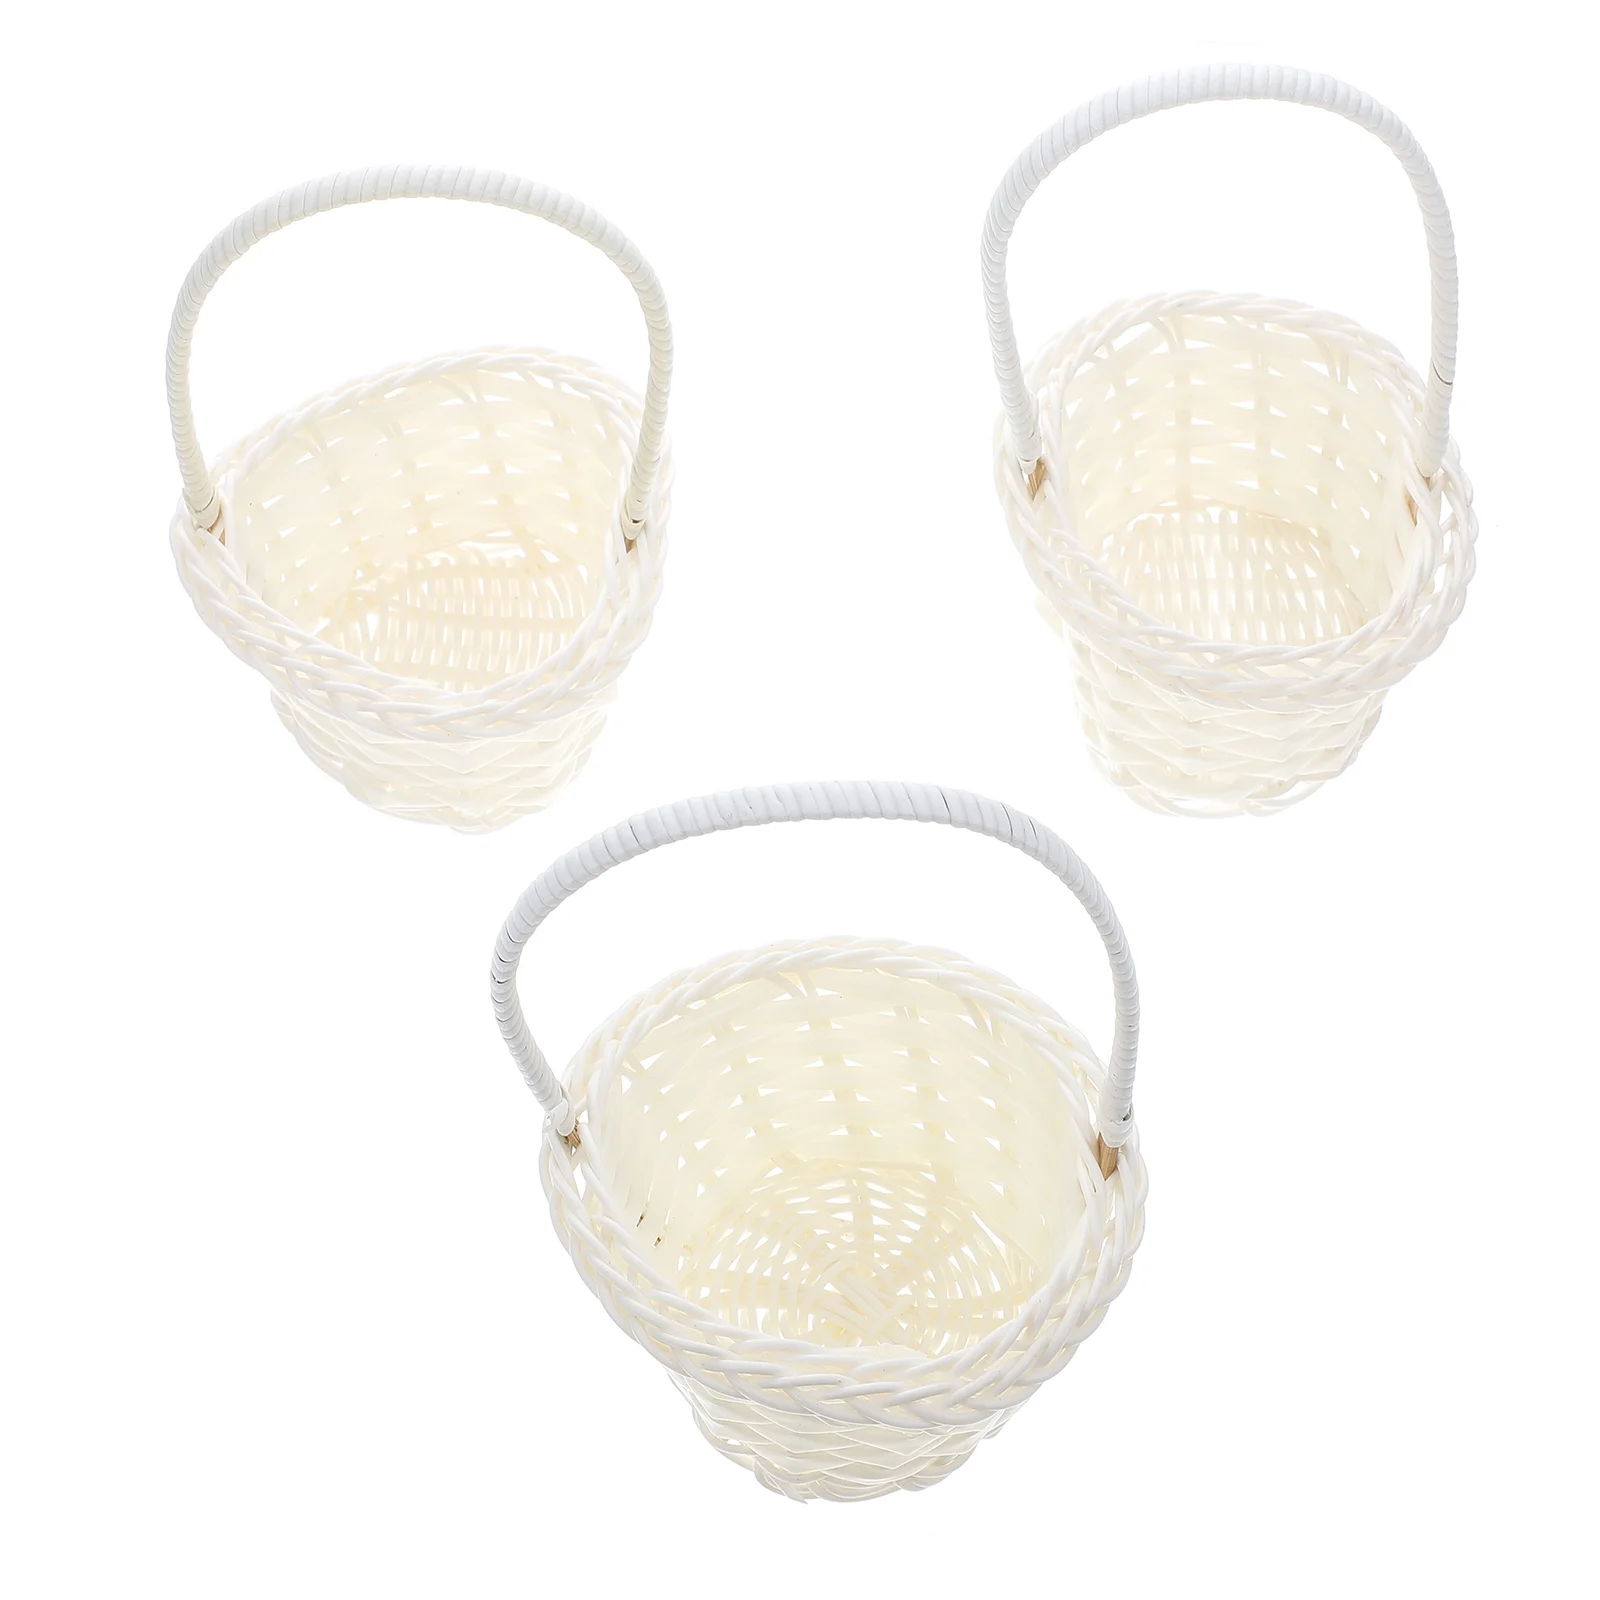 

Basket Baskets Flower Rattan Woven Mini Candy Wedding Easter Gift Girl Wicker Handle Party Storage Weaving Miniature Tiny Willow